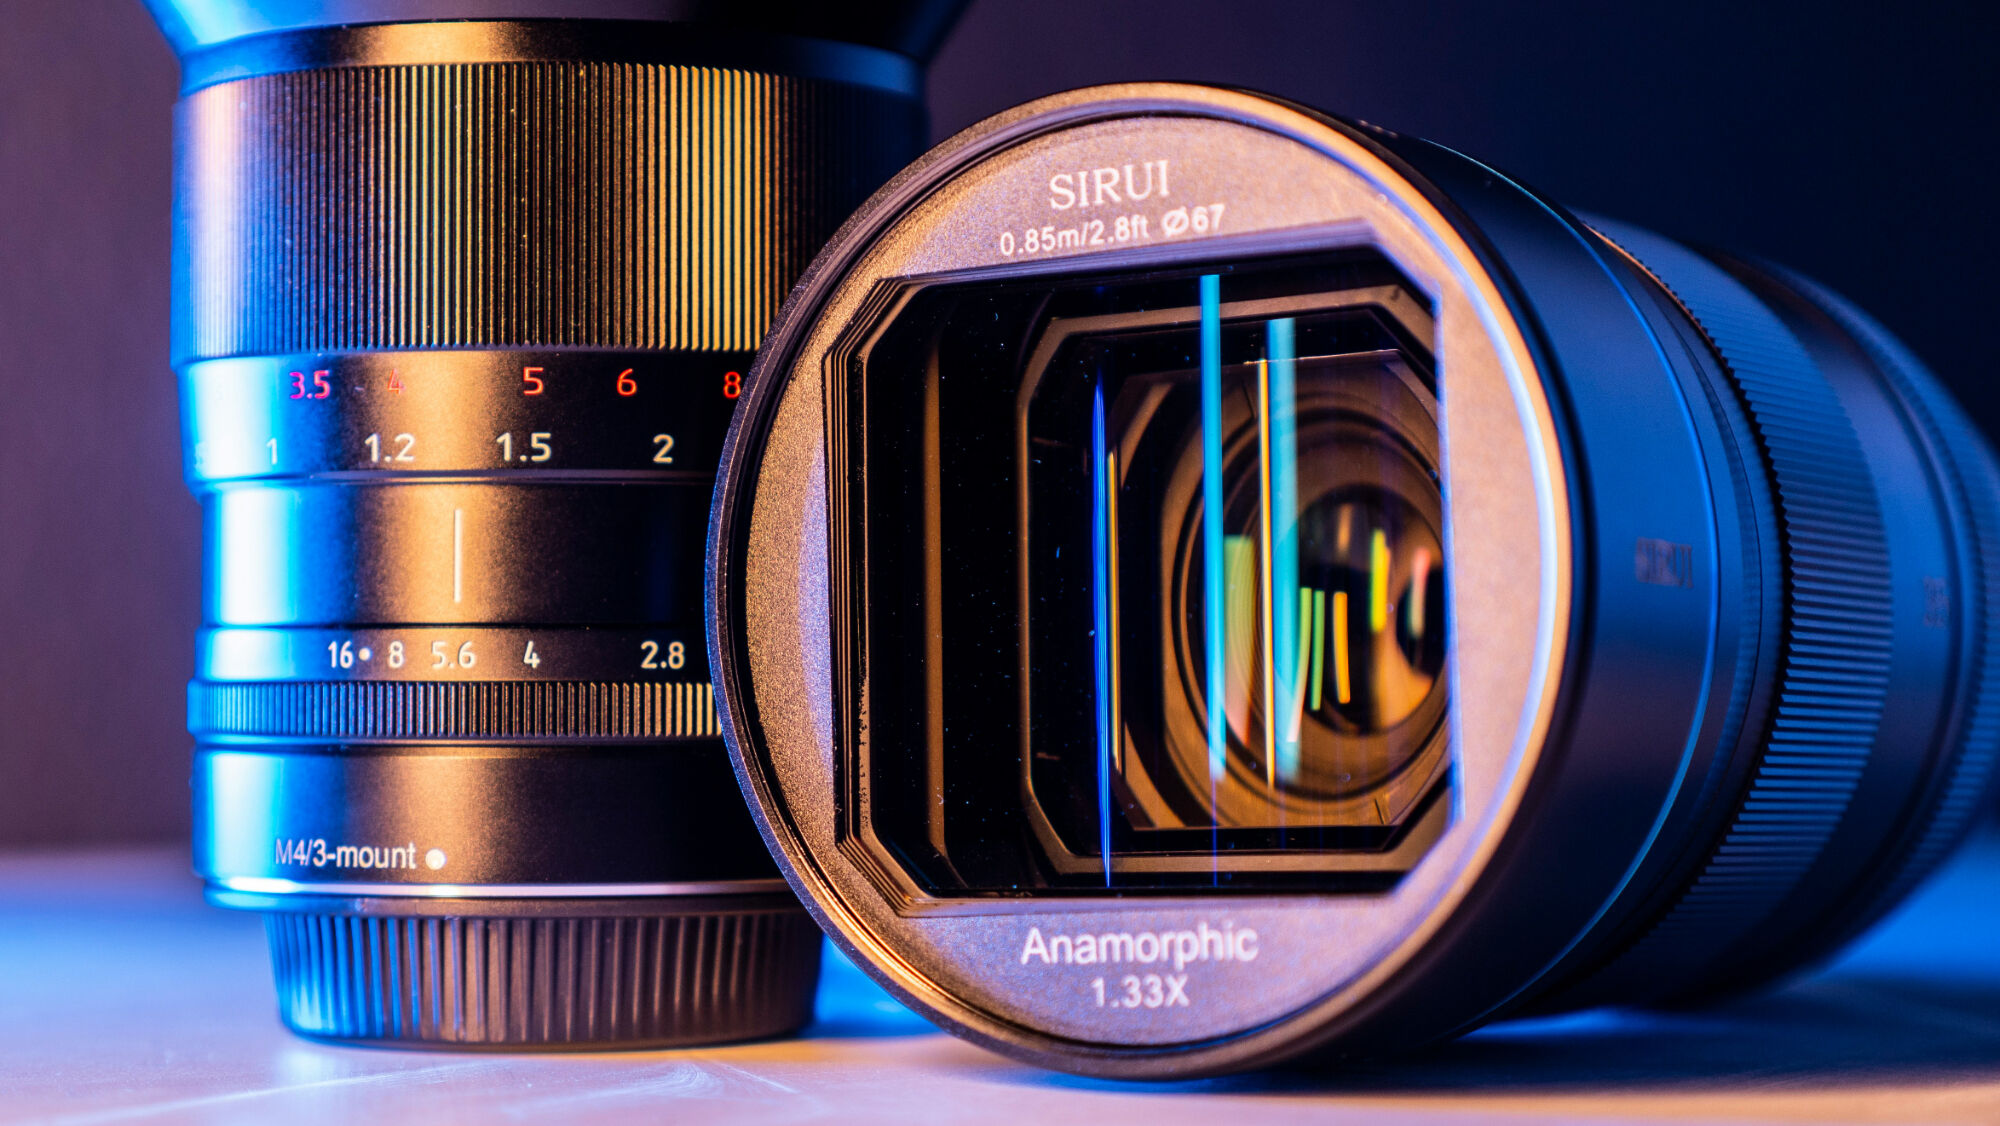 CCD vs. CMOS image sensors: Which one is more sensitive?